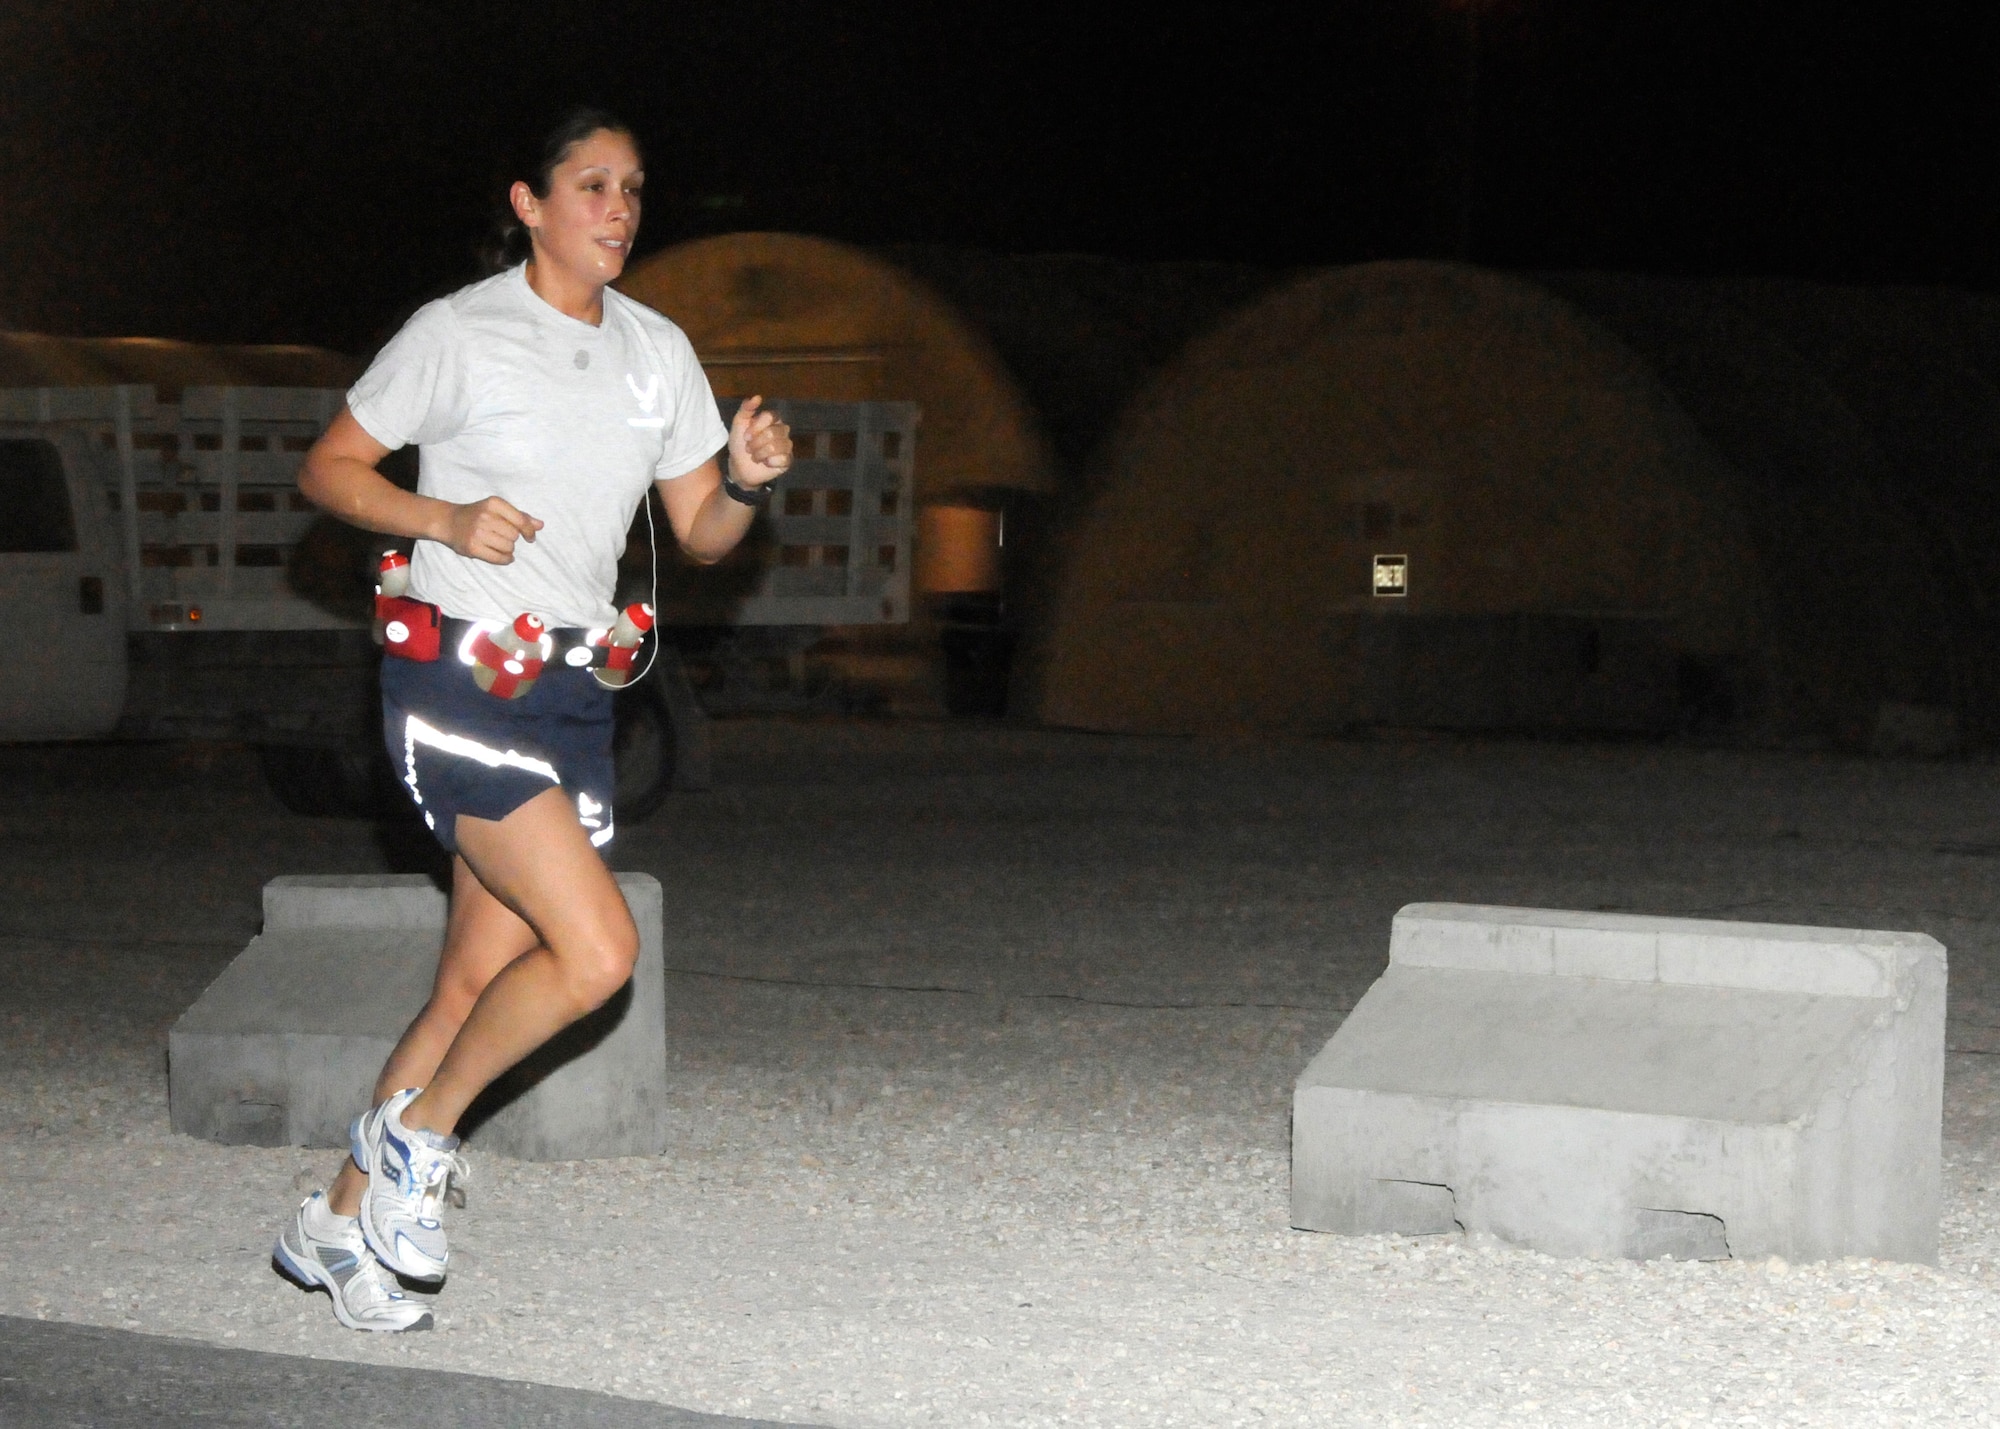 SOUTHWEST ASIA -- 1st Lt. Jessica Lopez runs the first 3 miles of her 26.2-mile marathon on base March 2. The C-17A pilot from Charleston Air Force Base, S.C., was training to run the L.A. Marathon with her mother, Dawn, when she got deployment orders. The pair decided to run at the same time anyway, mother in California and daughter in the desert. Lieutenant Lopez finished in 3:39. (U.S. Air Force photo/Senior Airman Domonique Simmons)